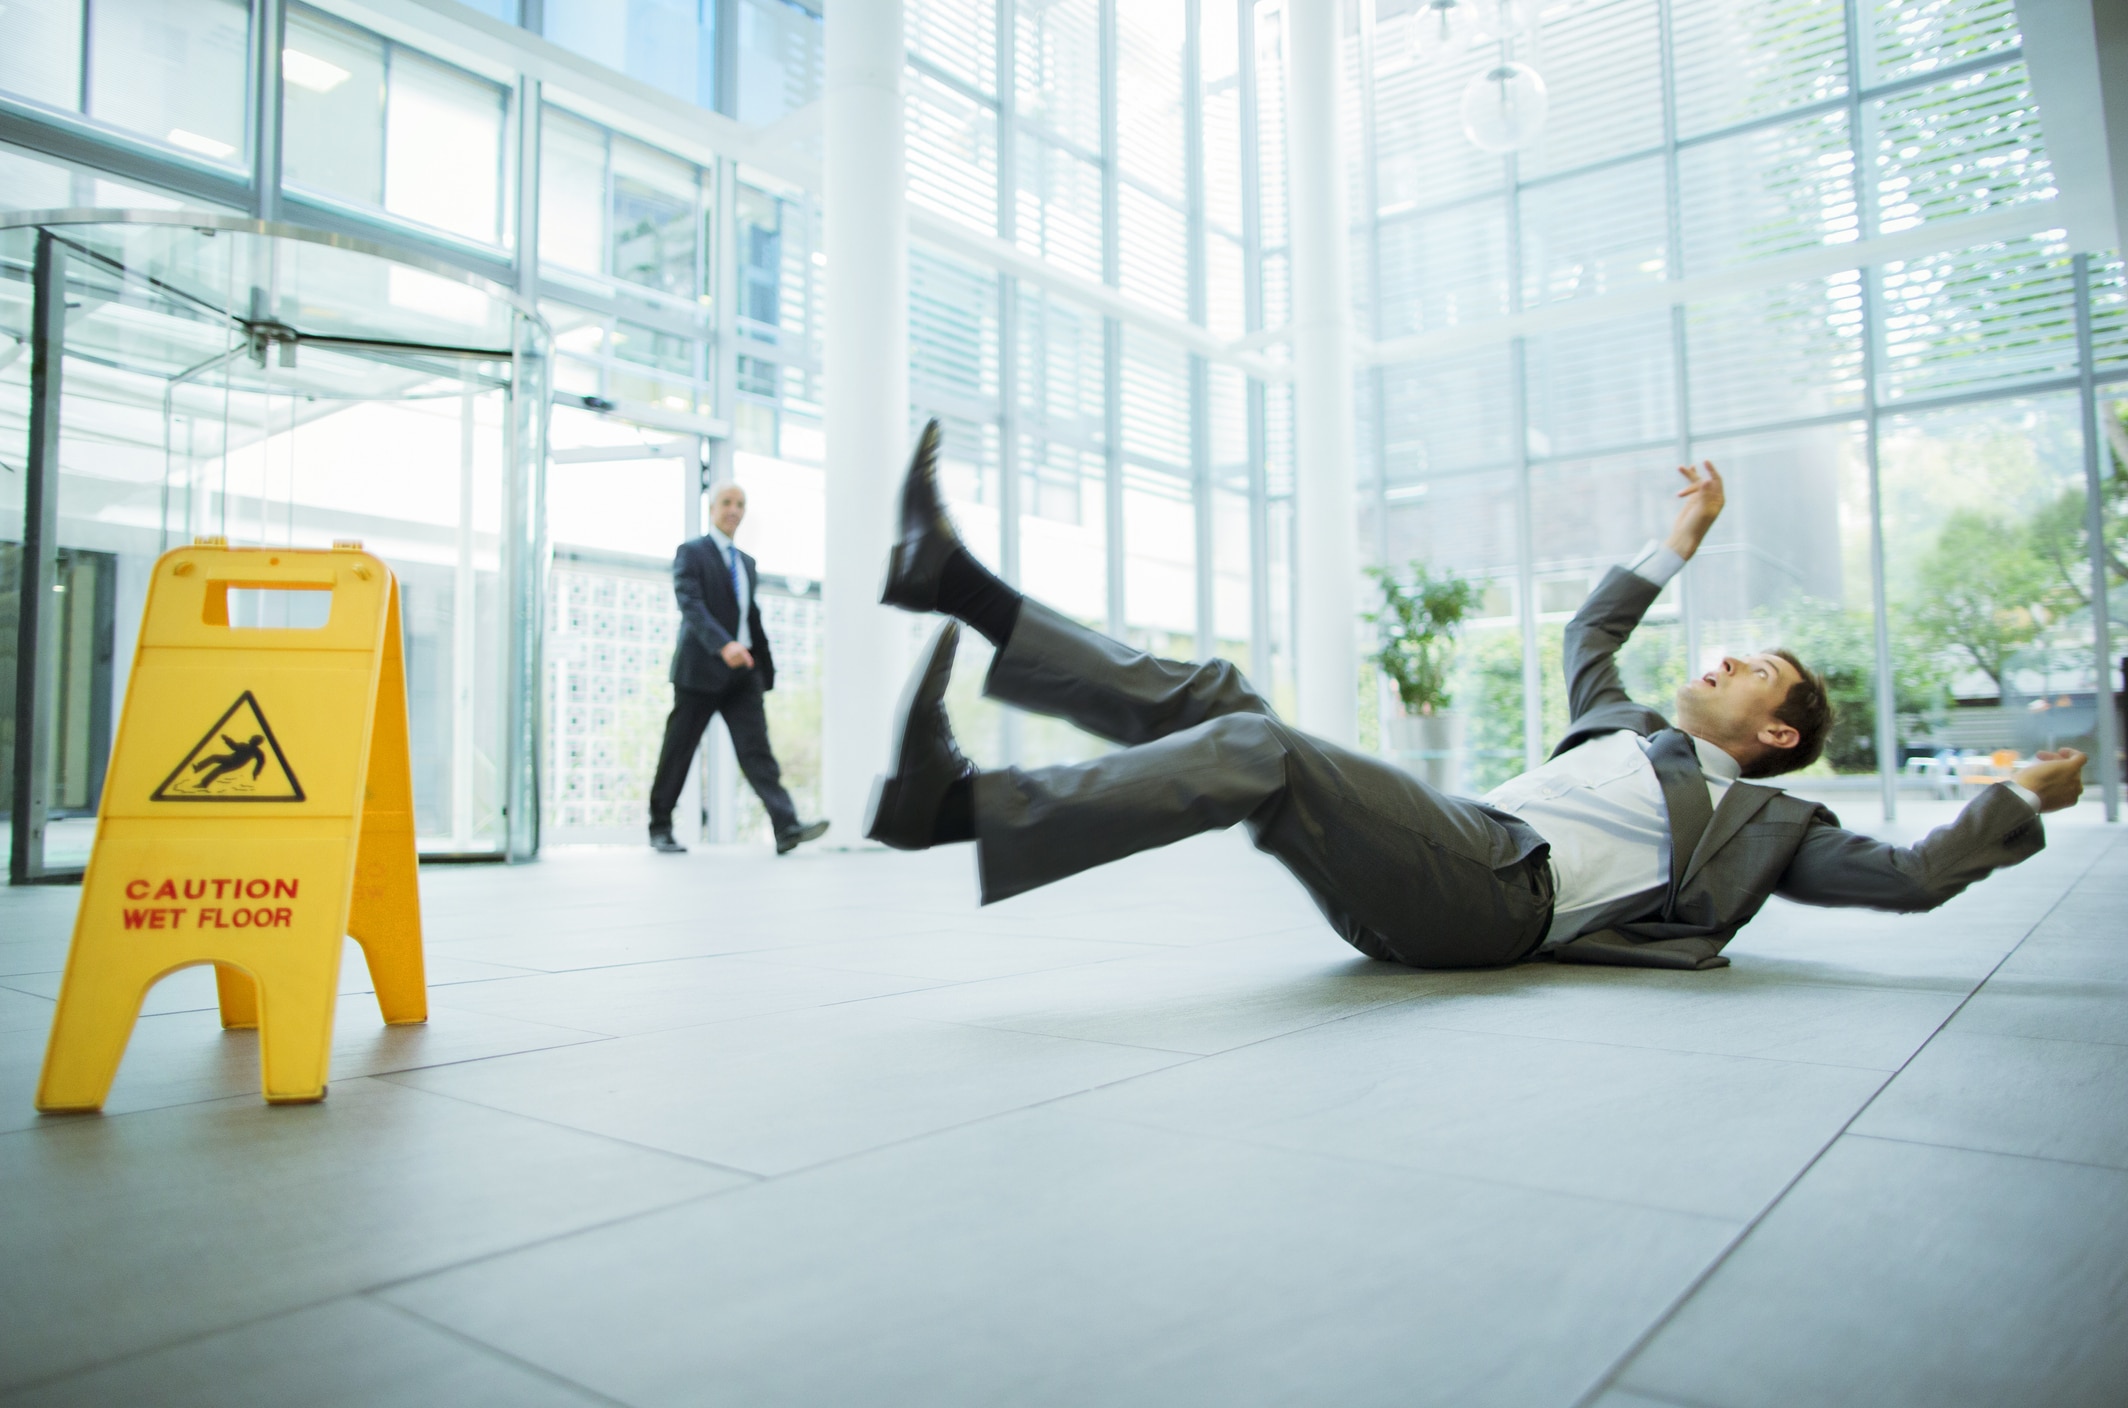 Businessman slipping on floor of office building due to no anti-slip flooring installed